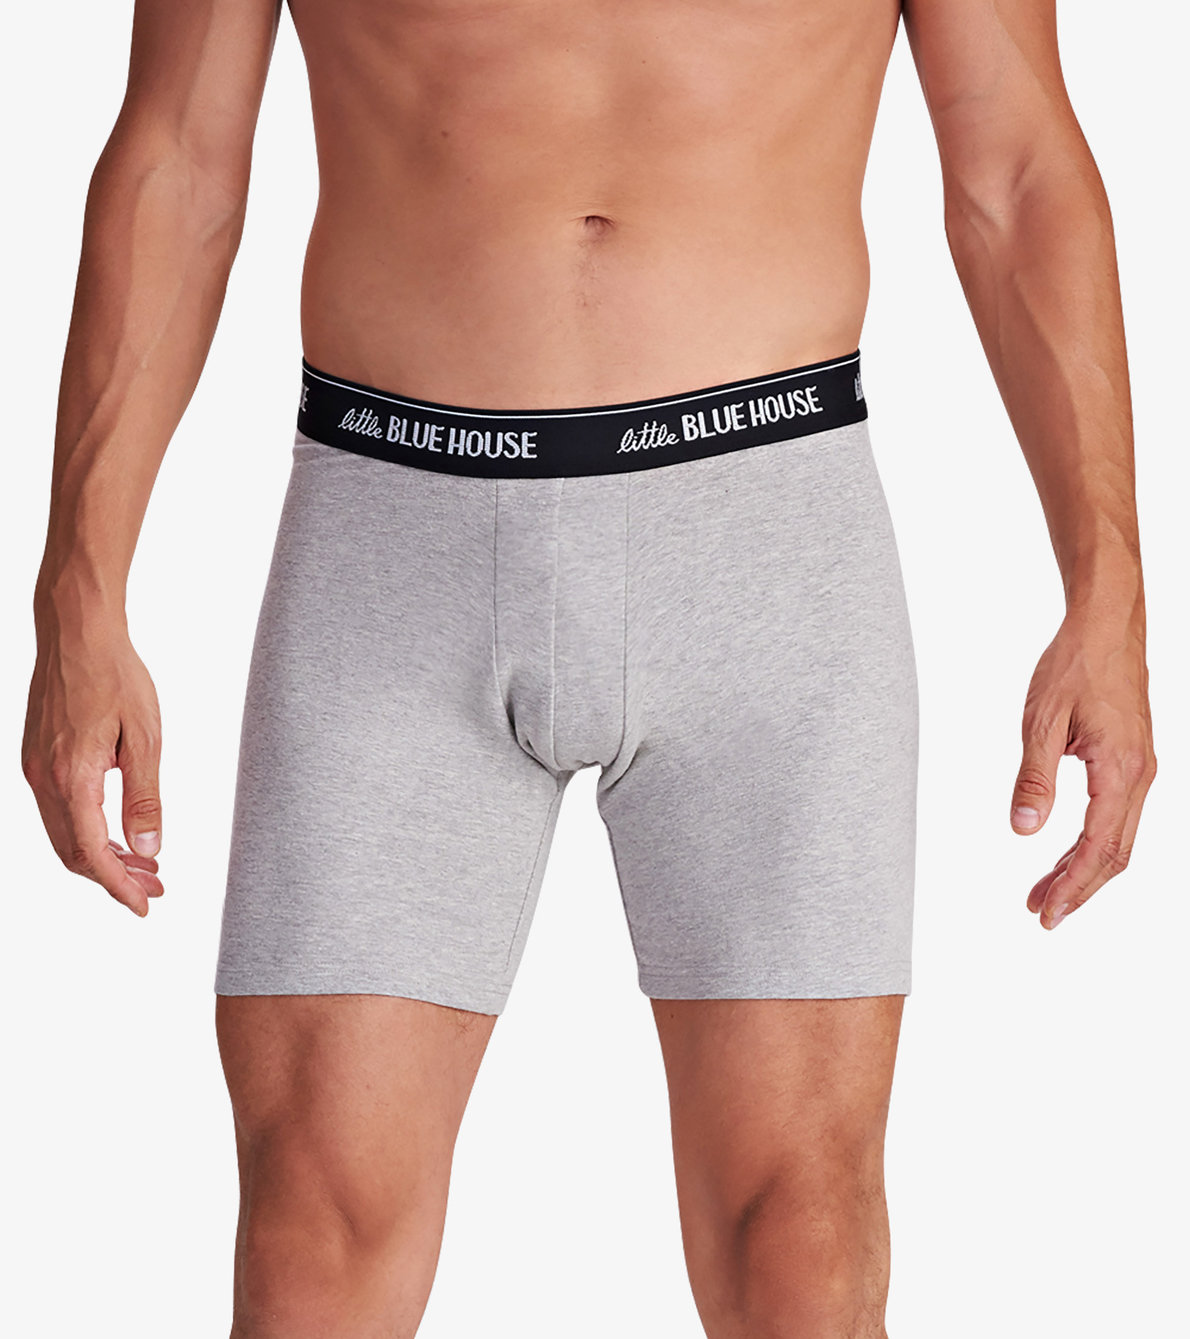 View larger image of The Puck Stops Here Men's Boxer Briefs